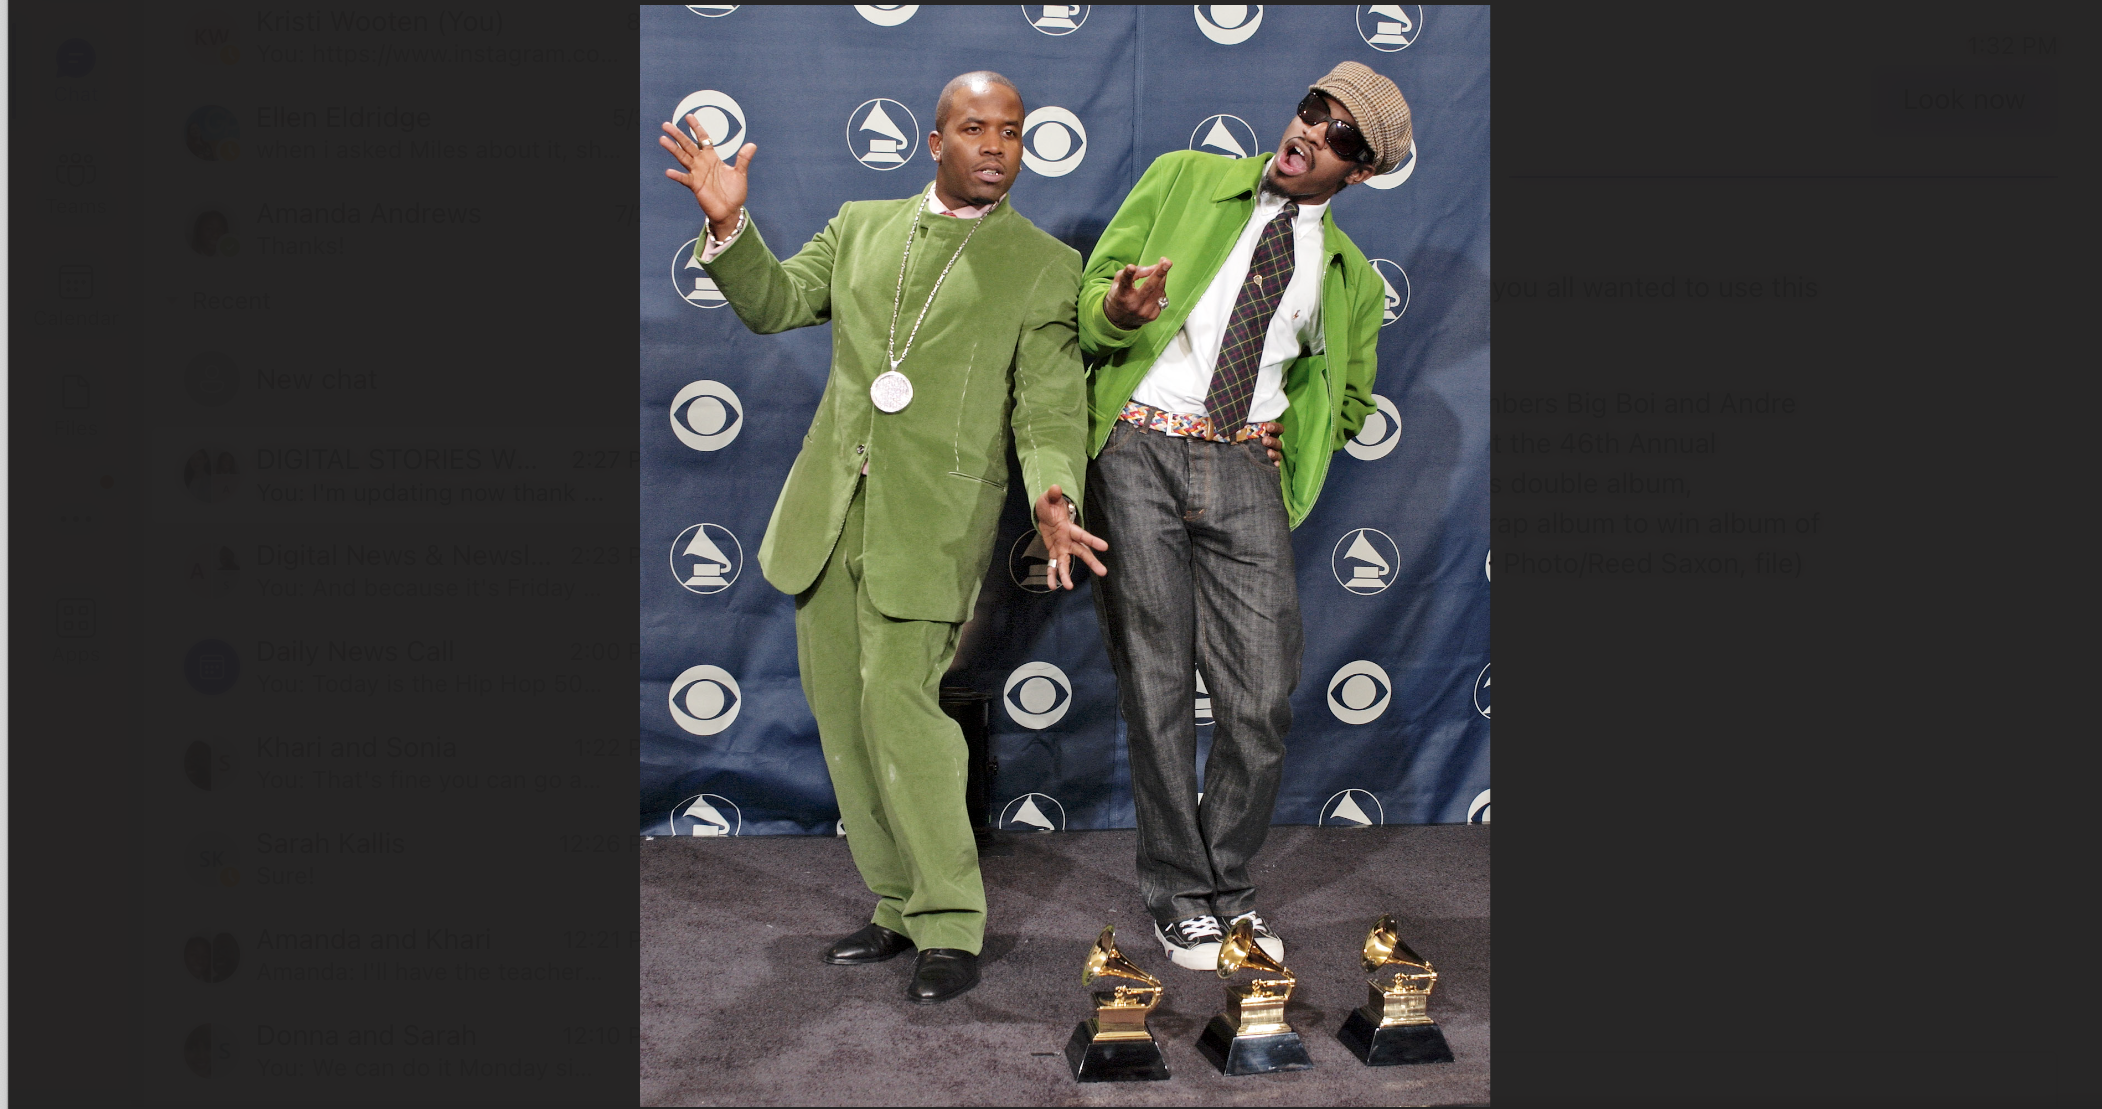 Big Boi And Andre 3000 Working On Solo Projects Before New Outkast